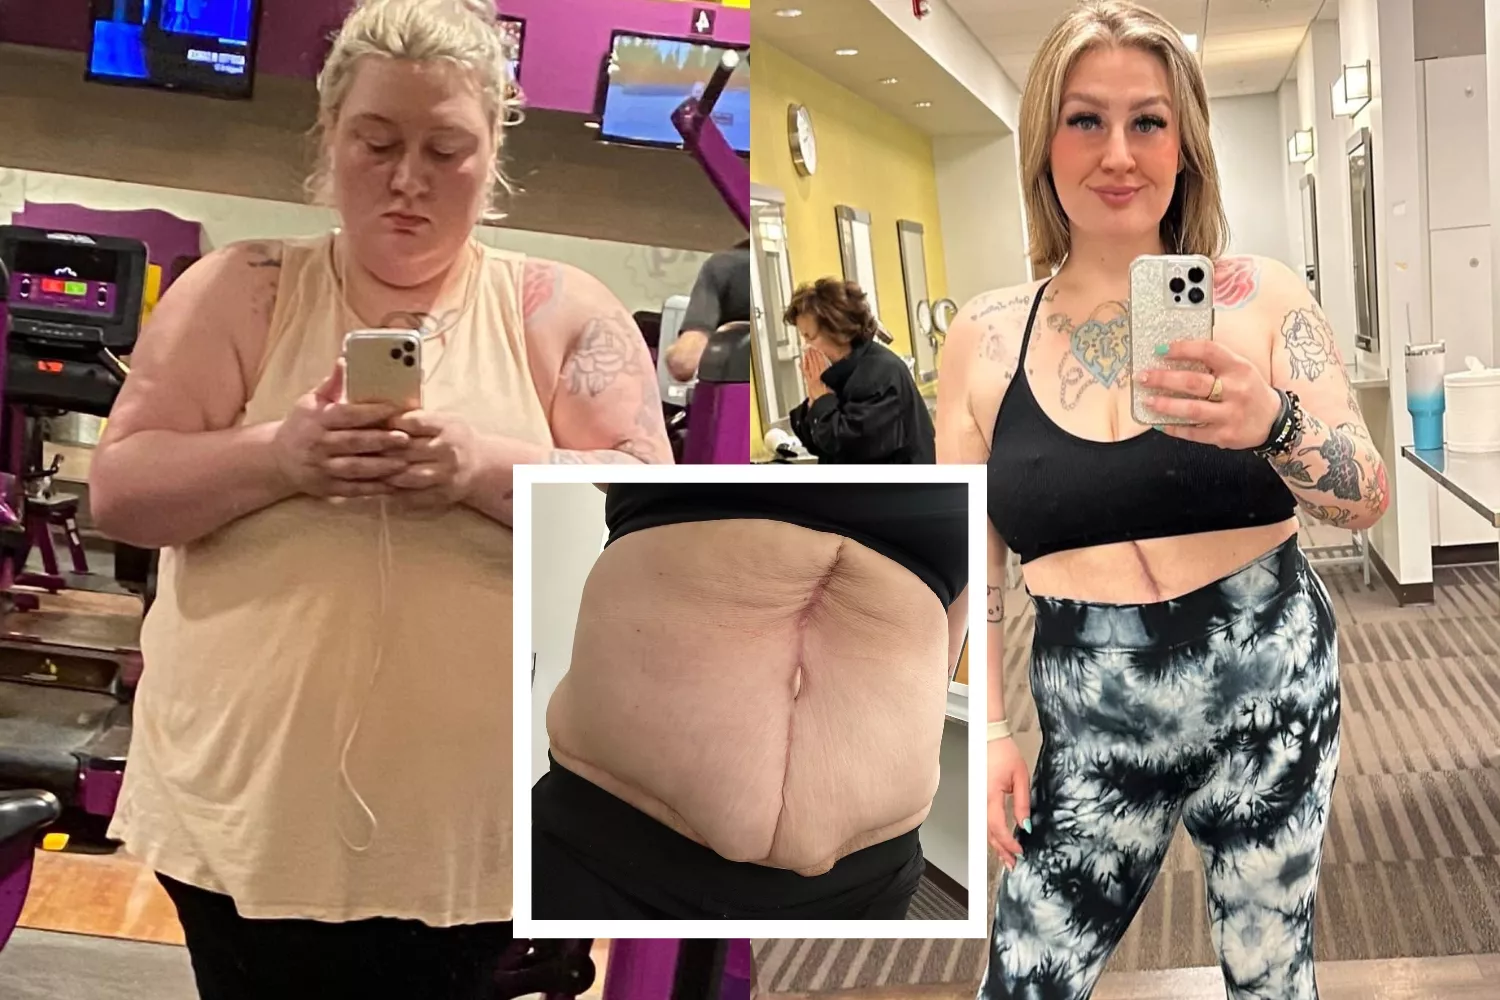 Patient With Botched Tummy Tuck Gets Makeover You Won't Believe